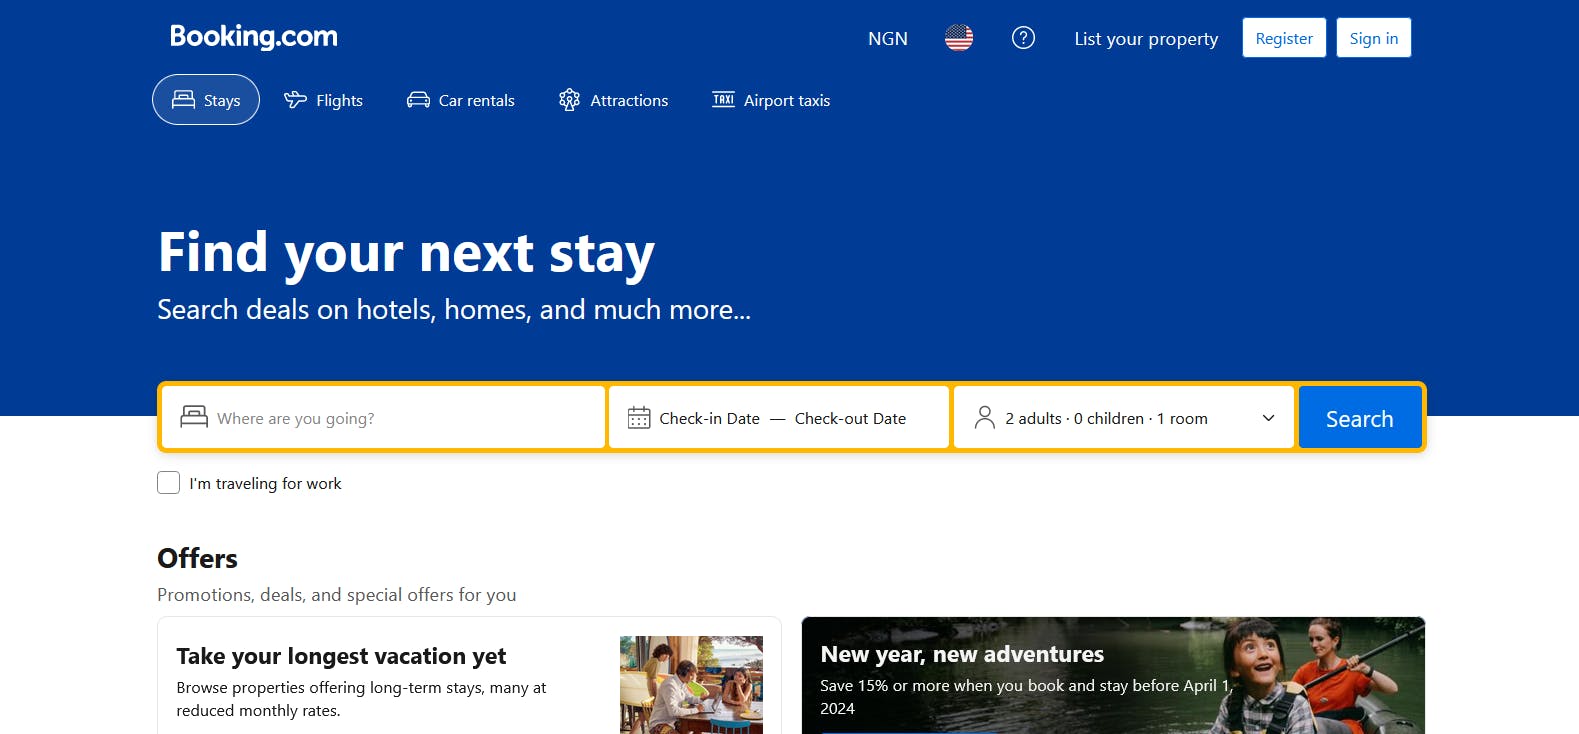 An image of Booking.com landing page.